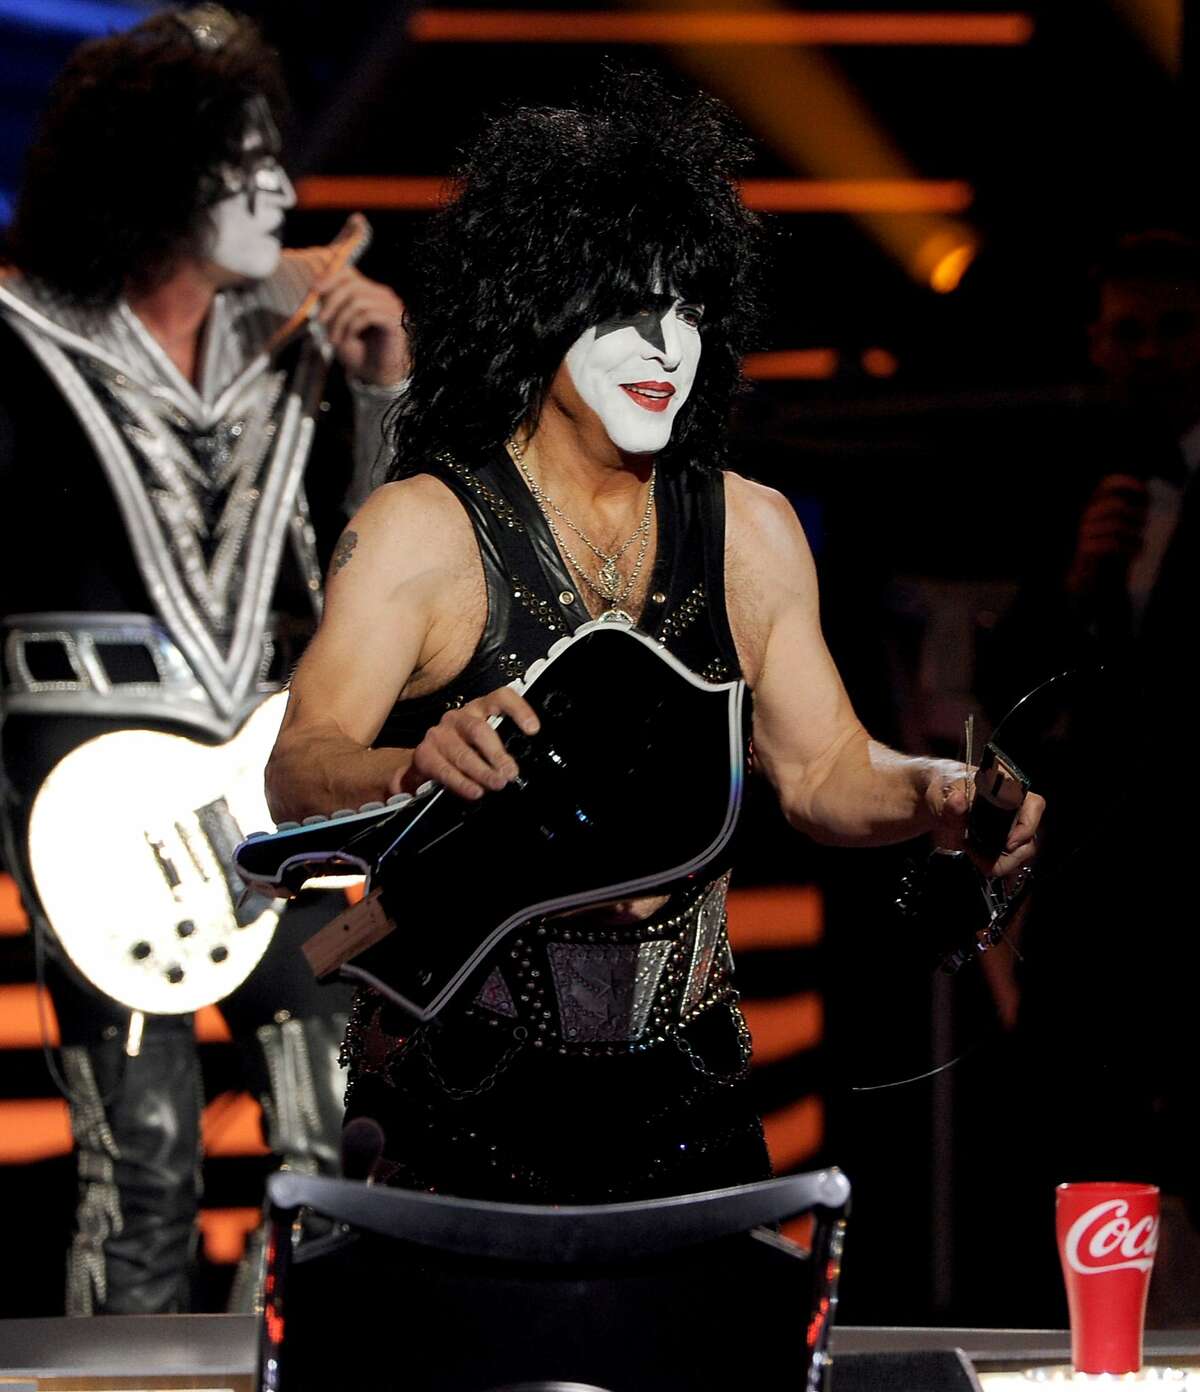 LOS ANGELES, CA - MAY 21: Musician Paul Stanley of KISS performs onstage during Fox's "American Idol" XIII Finale at Nokia Theatre L.A. Live on May 21, 2014 in Los Angeles, California. (Photo by Kevin Winter/Getty Images)